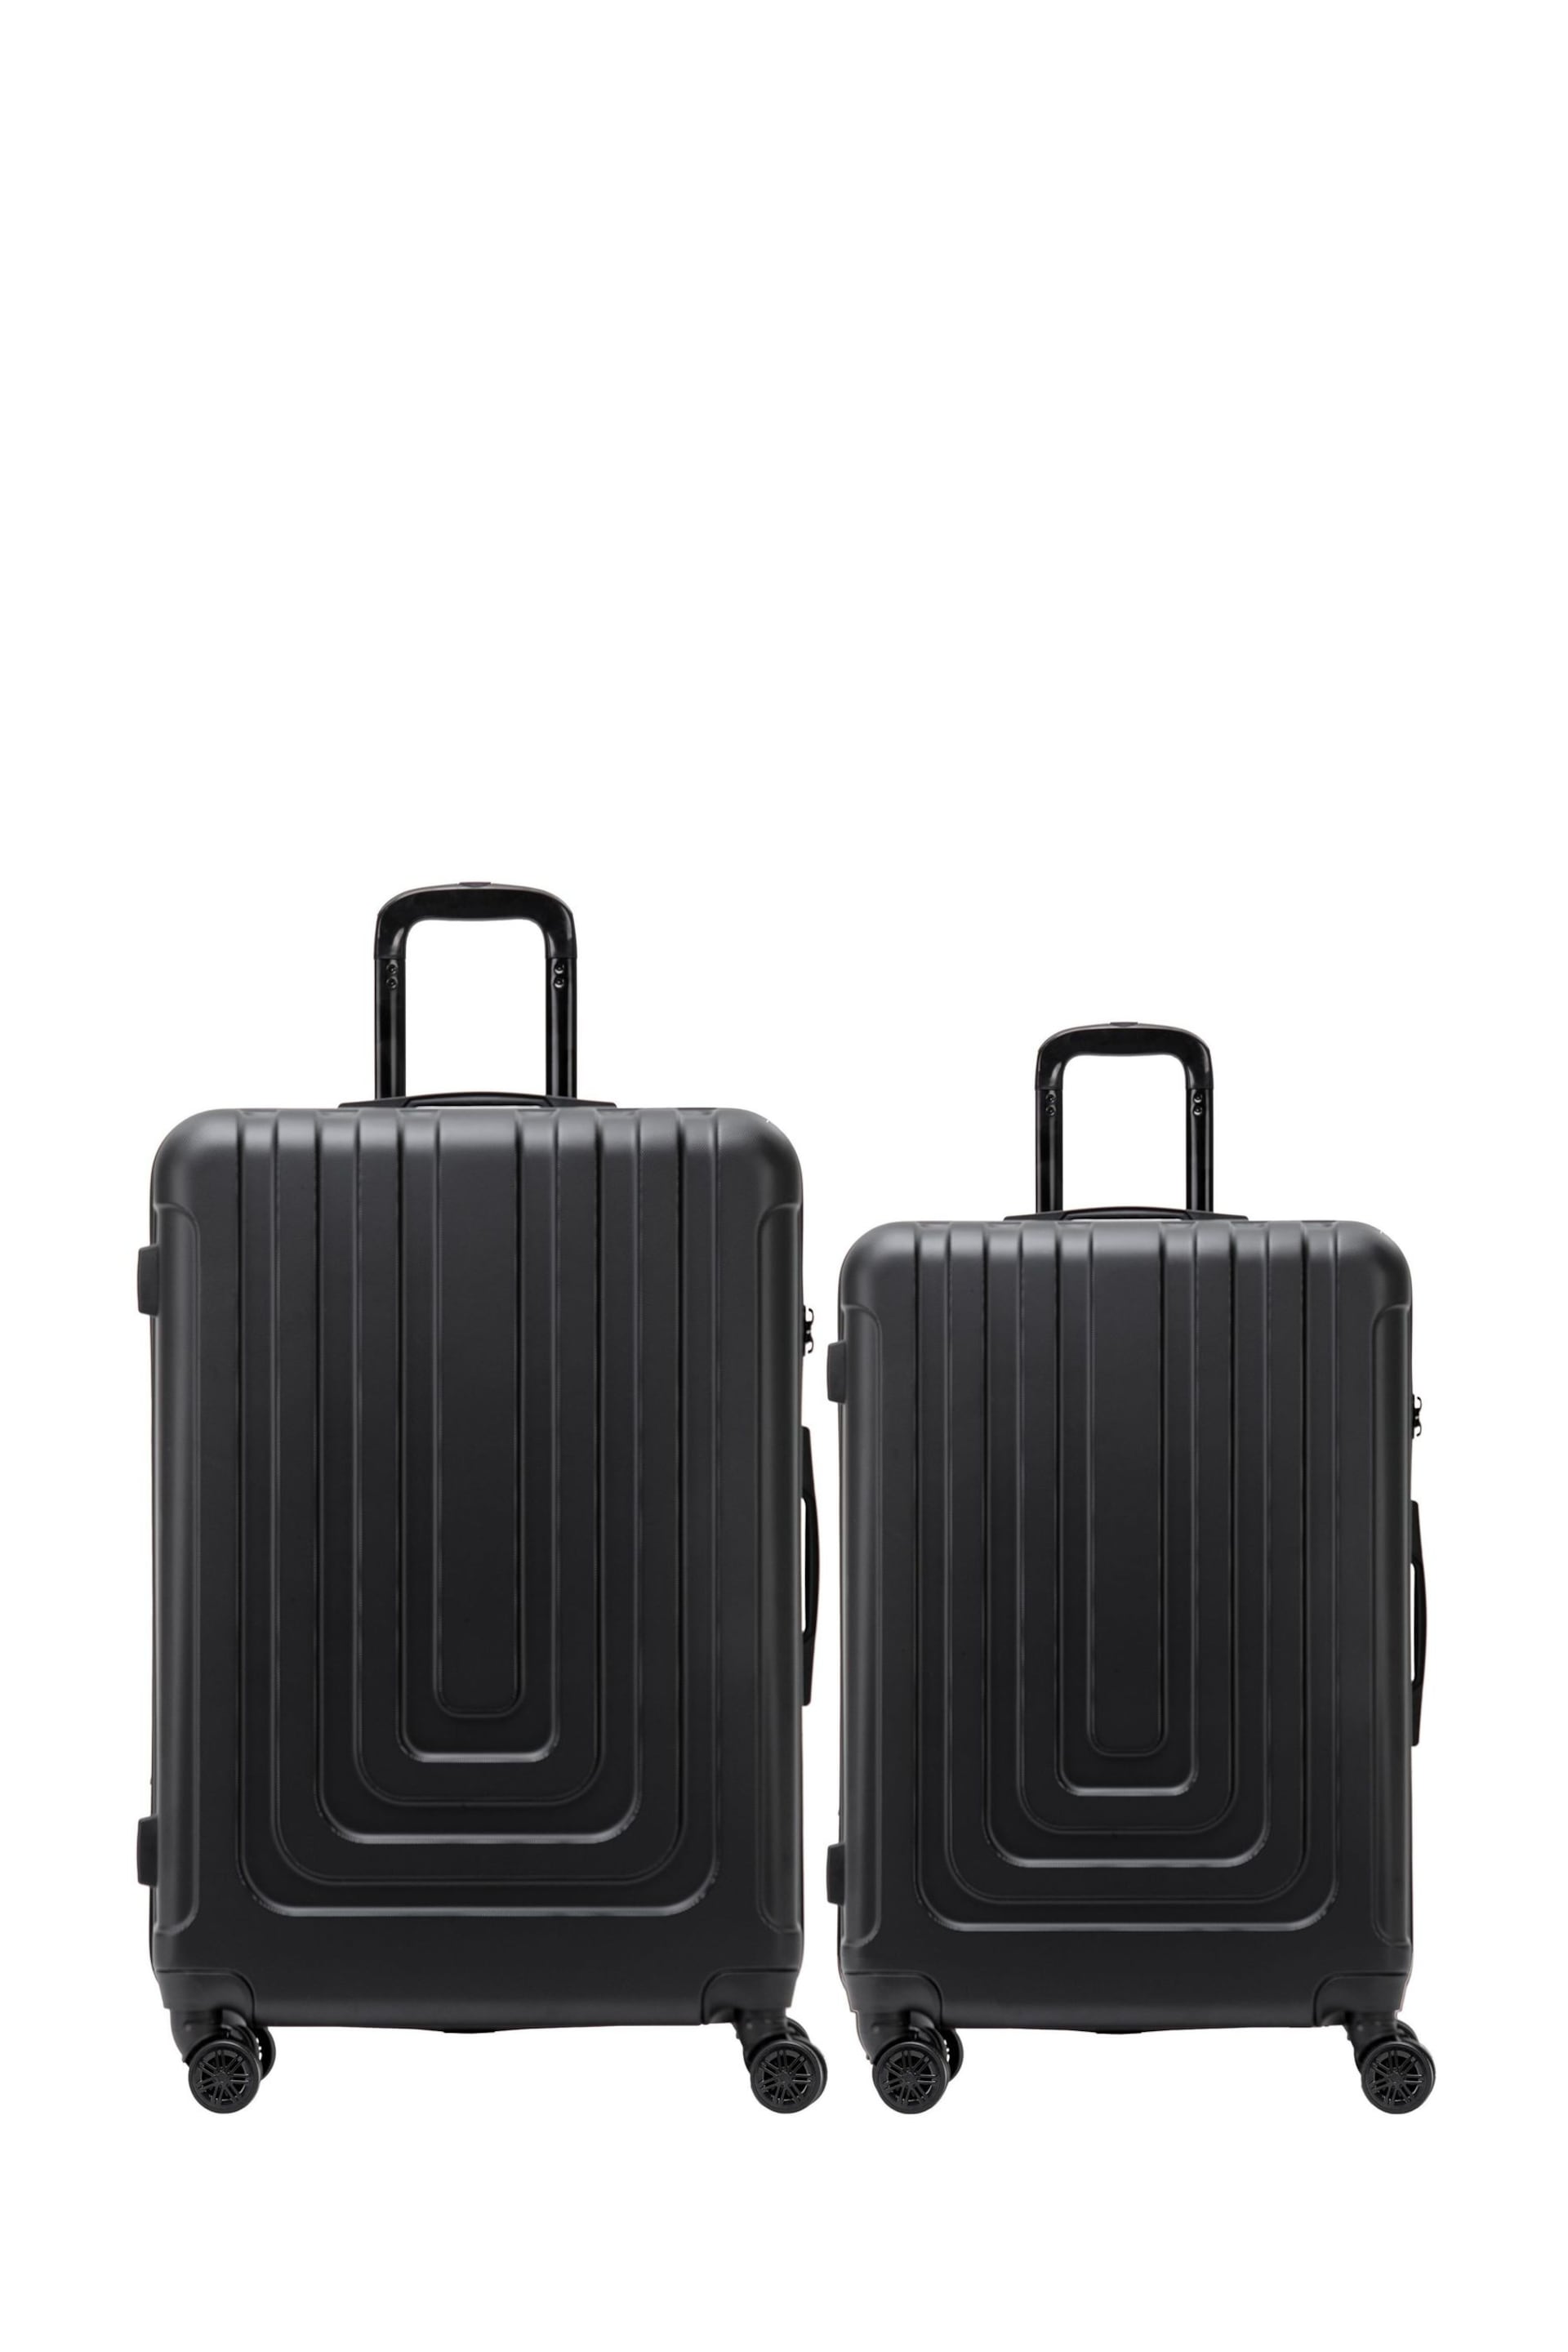 Flight Knight Medium Check-In & Small Carry-On Bubble Hardcase Brown Travel Suitcase Set of 2 - Image 1 of 8